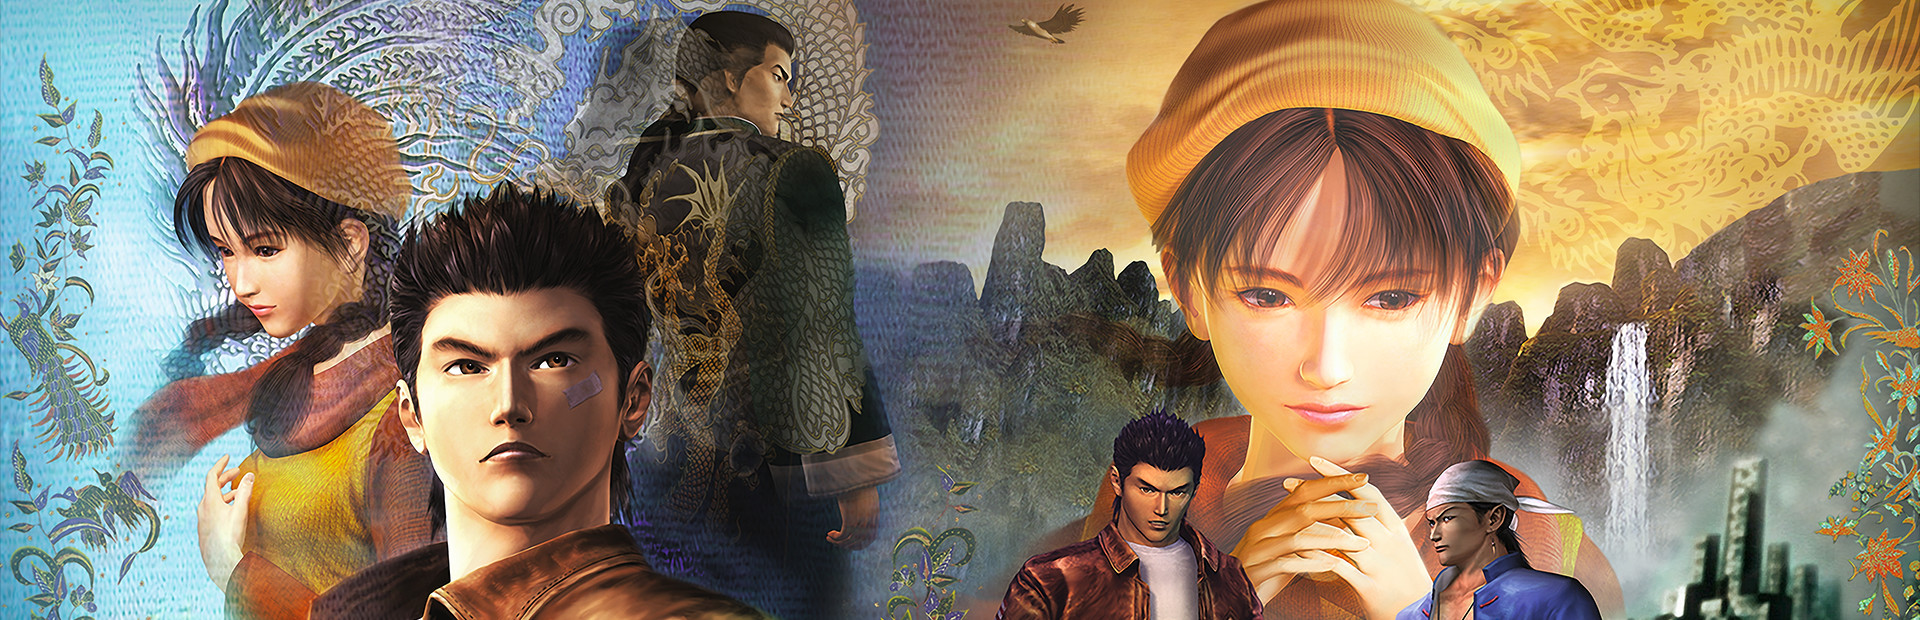 Shenmue I & II cover image